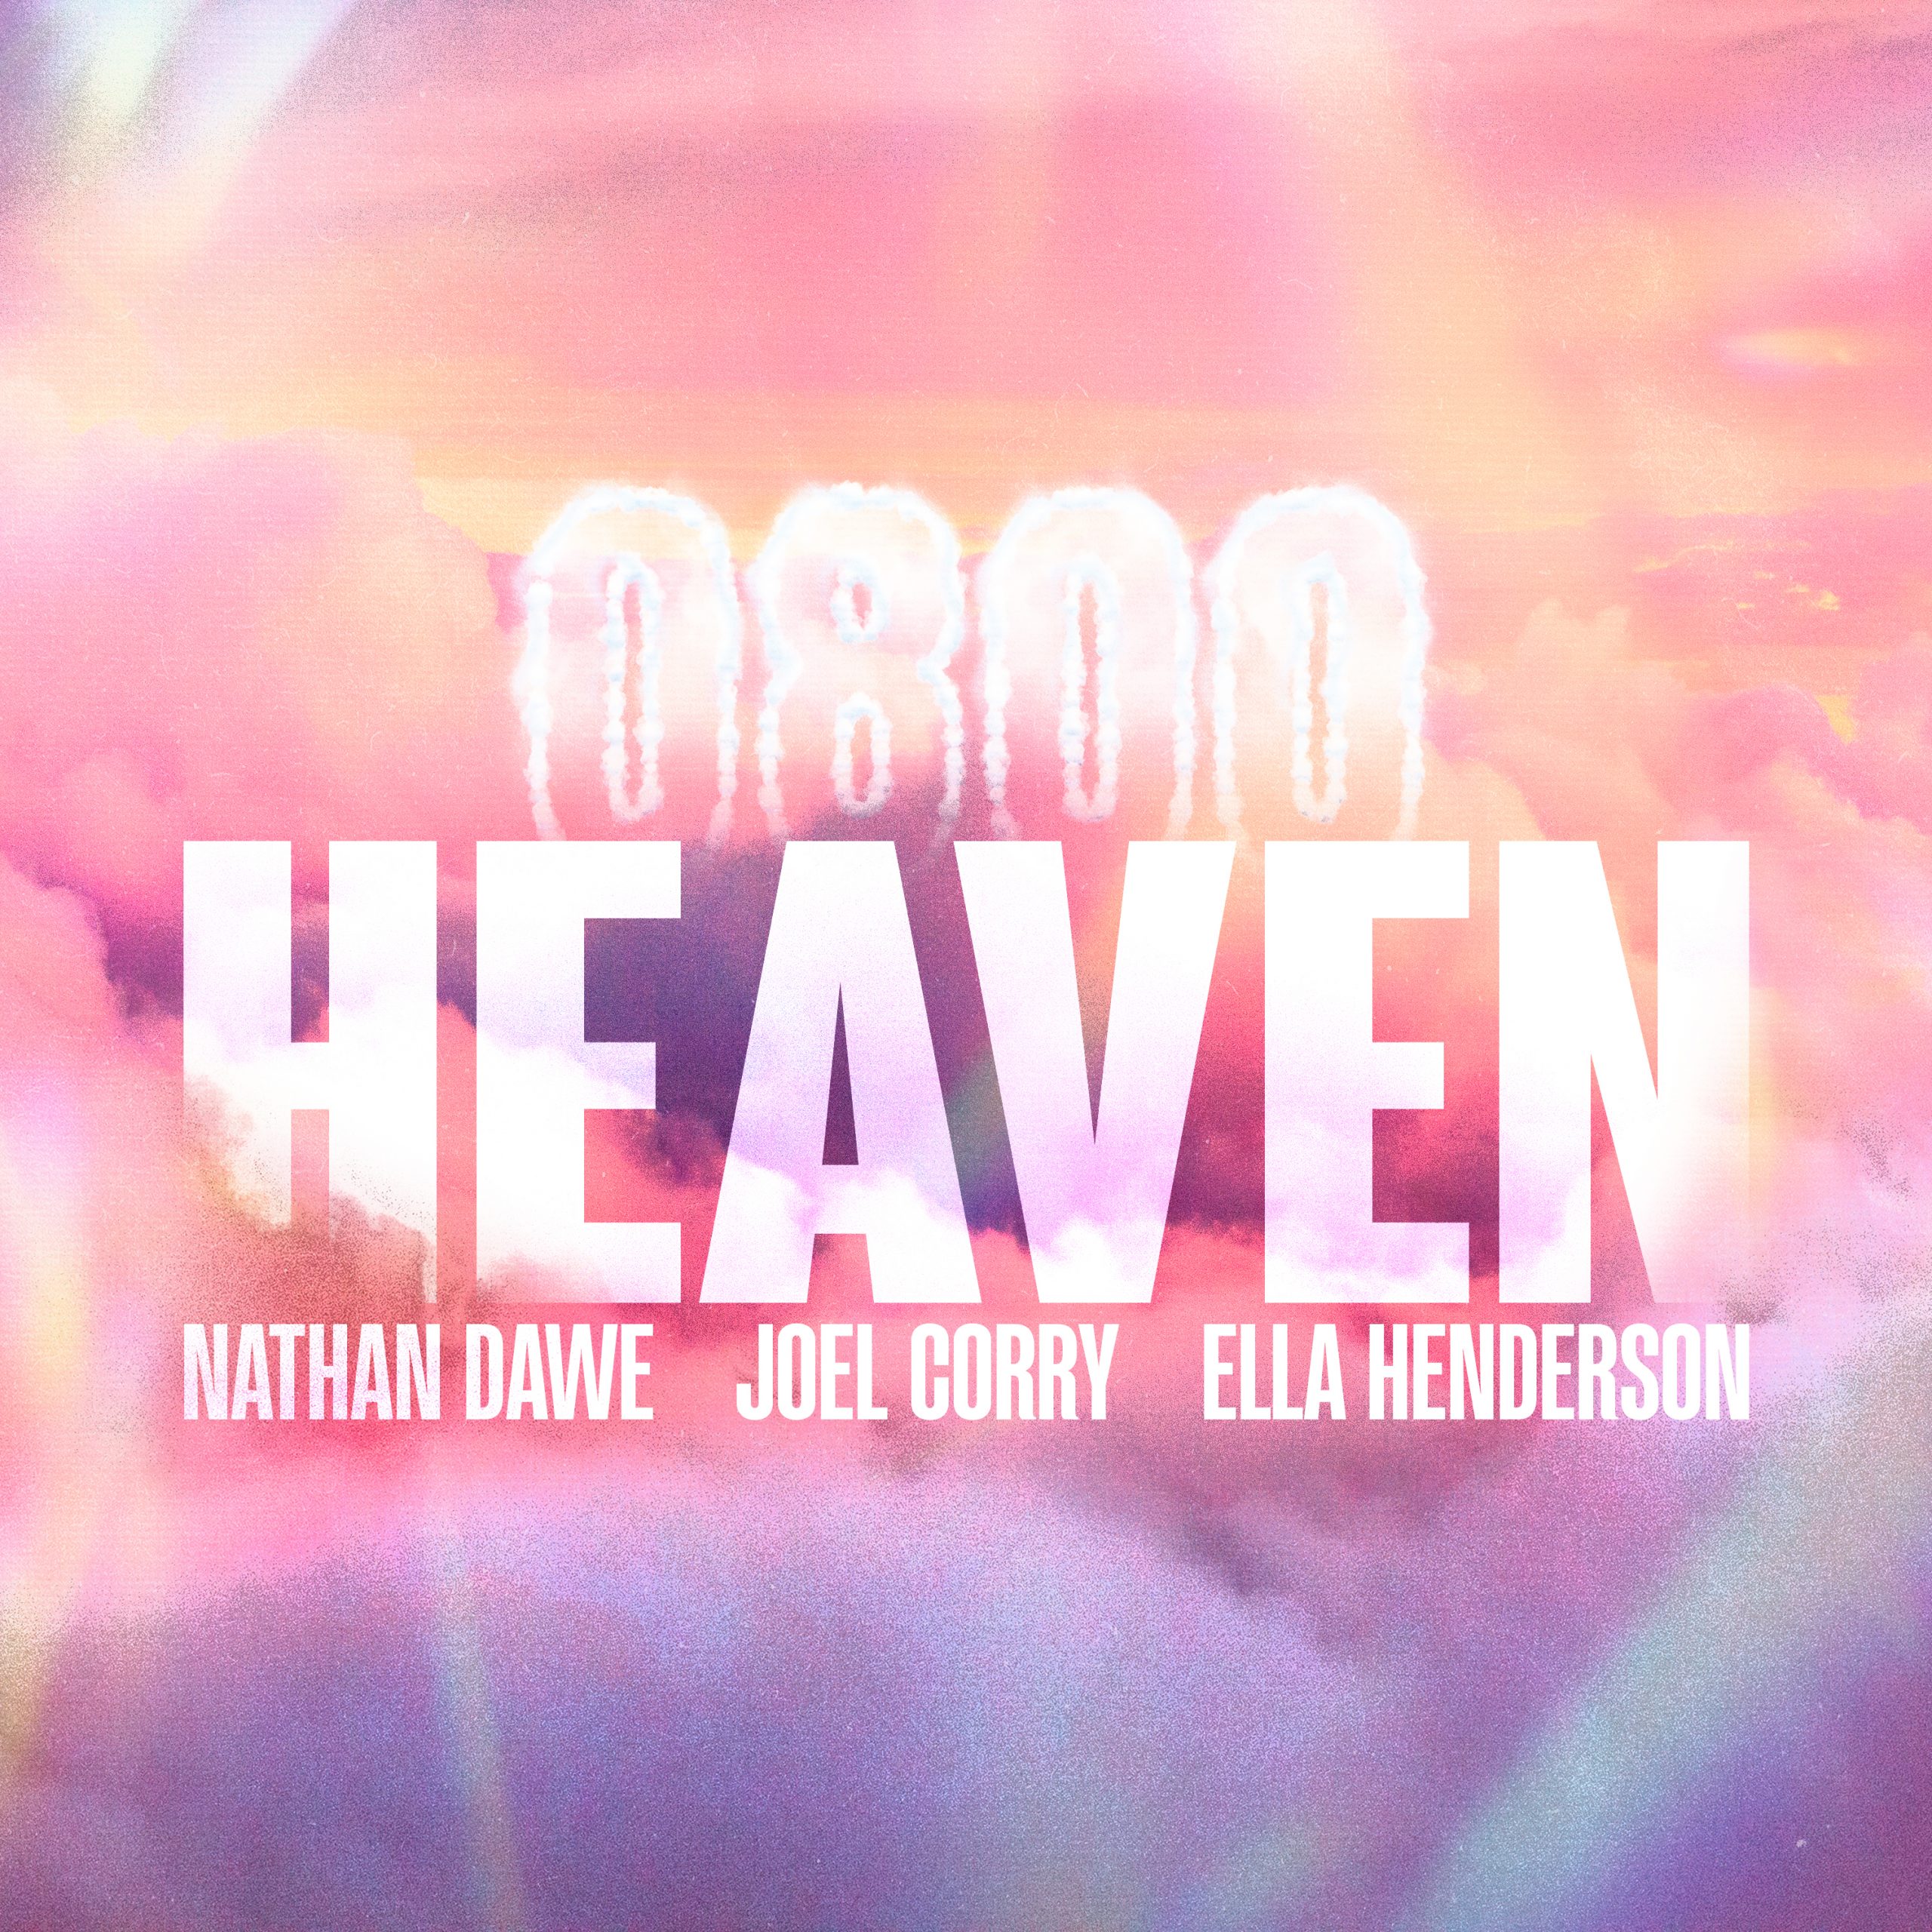 You are currently viewing SuperNova: Nathan Dave x Joel Corry x Ella Henderson – 0800 HEAVEN (12.07)